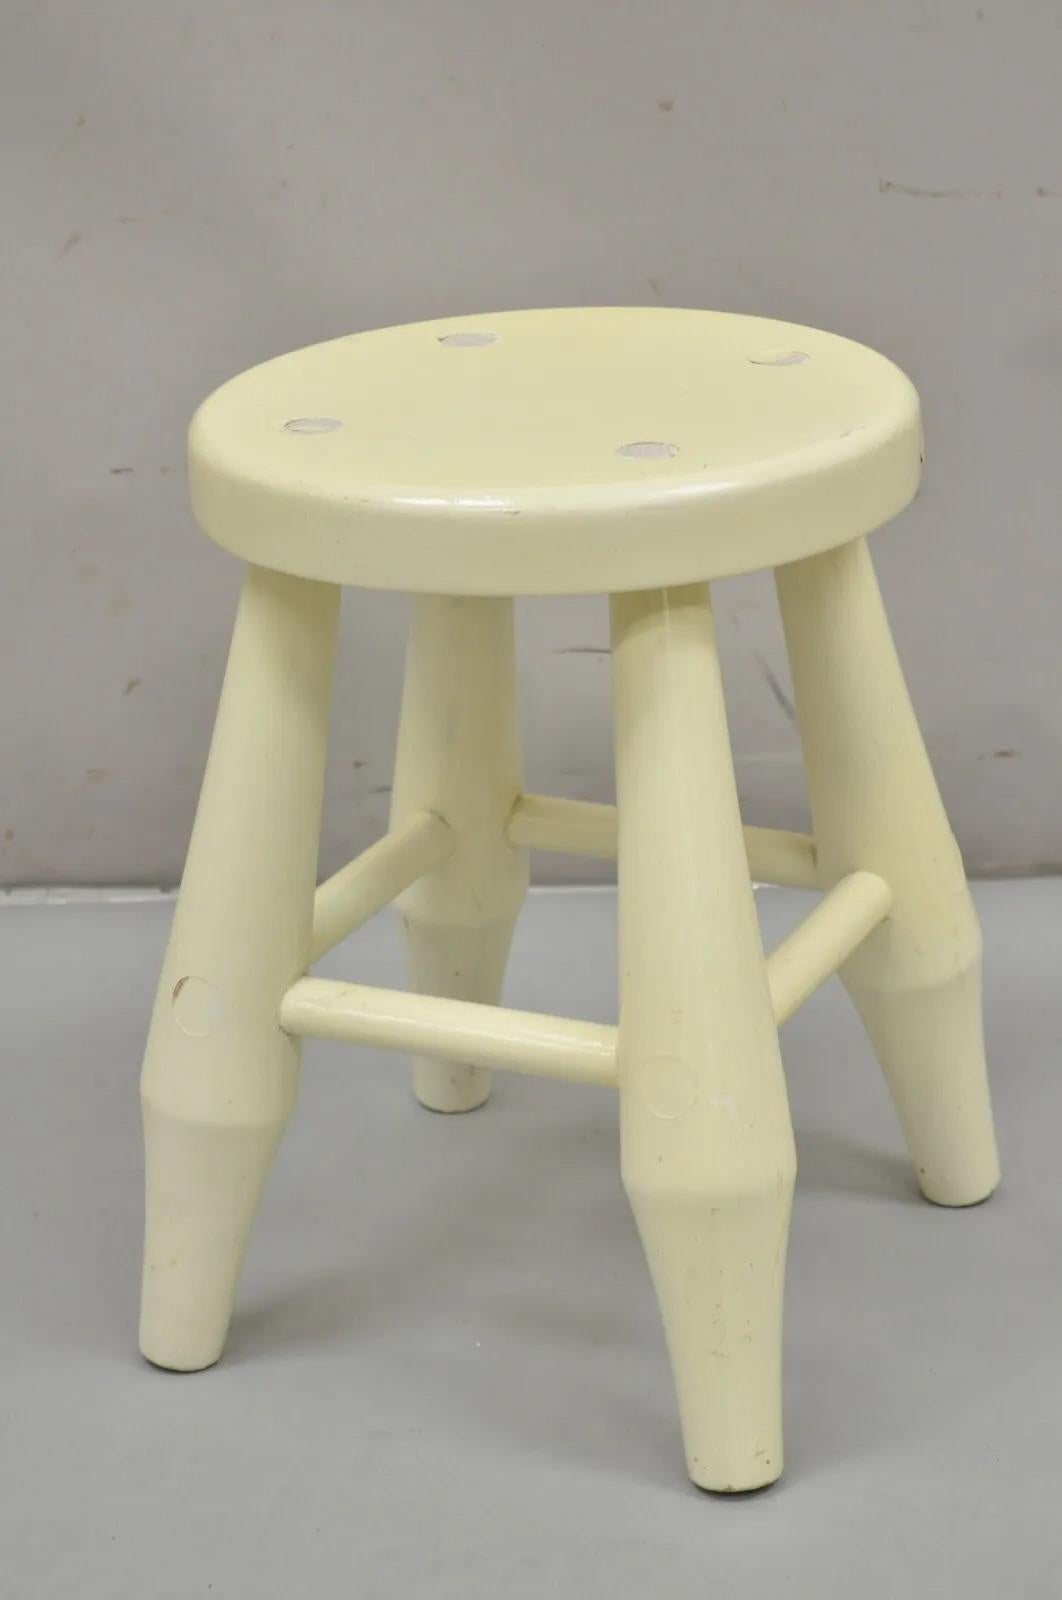 Vintage Primitive Modern Wooden Milking Stool with Bulbous Legs and Lacquer Finish. Circa Mid to Late 20th Century.
Measurements: 16.5